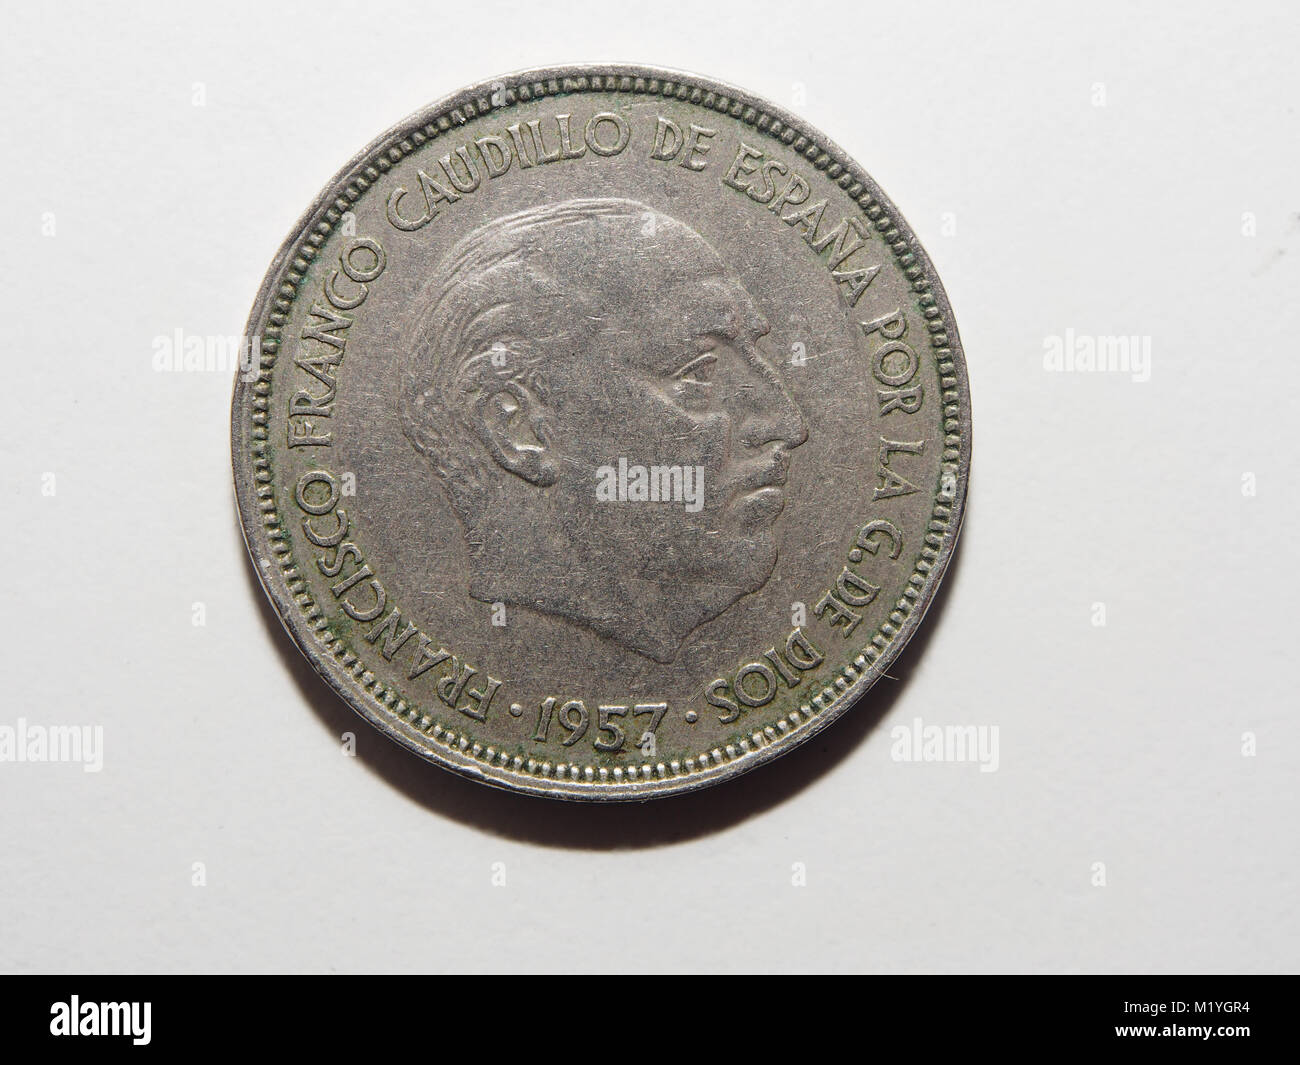 A Spanish  25 Peseta coin featuring the head of General Franco Stock Photo